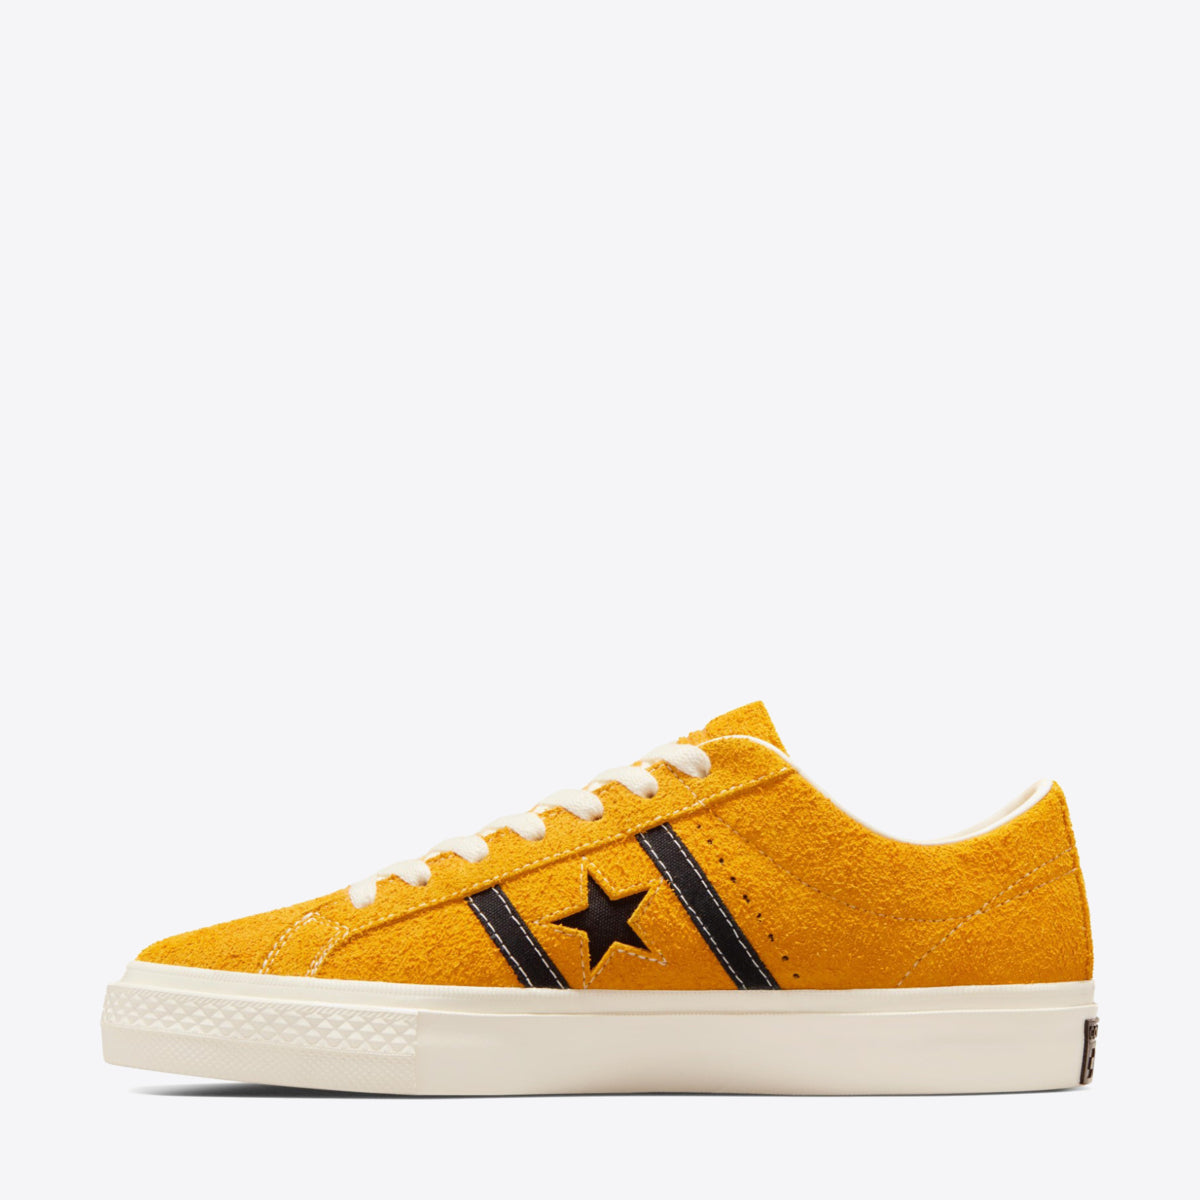 CONVERSE One Star Academy Pro Low Sunflower Gold/Black - Image 3